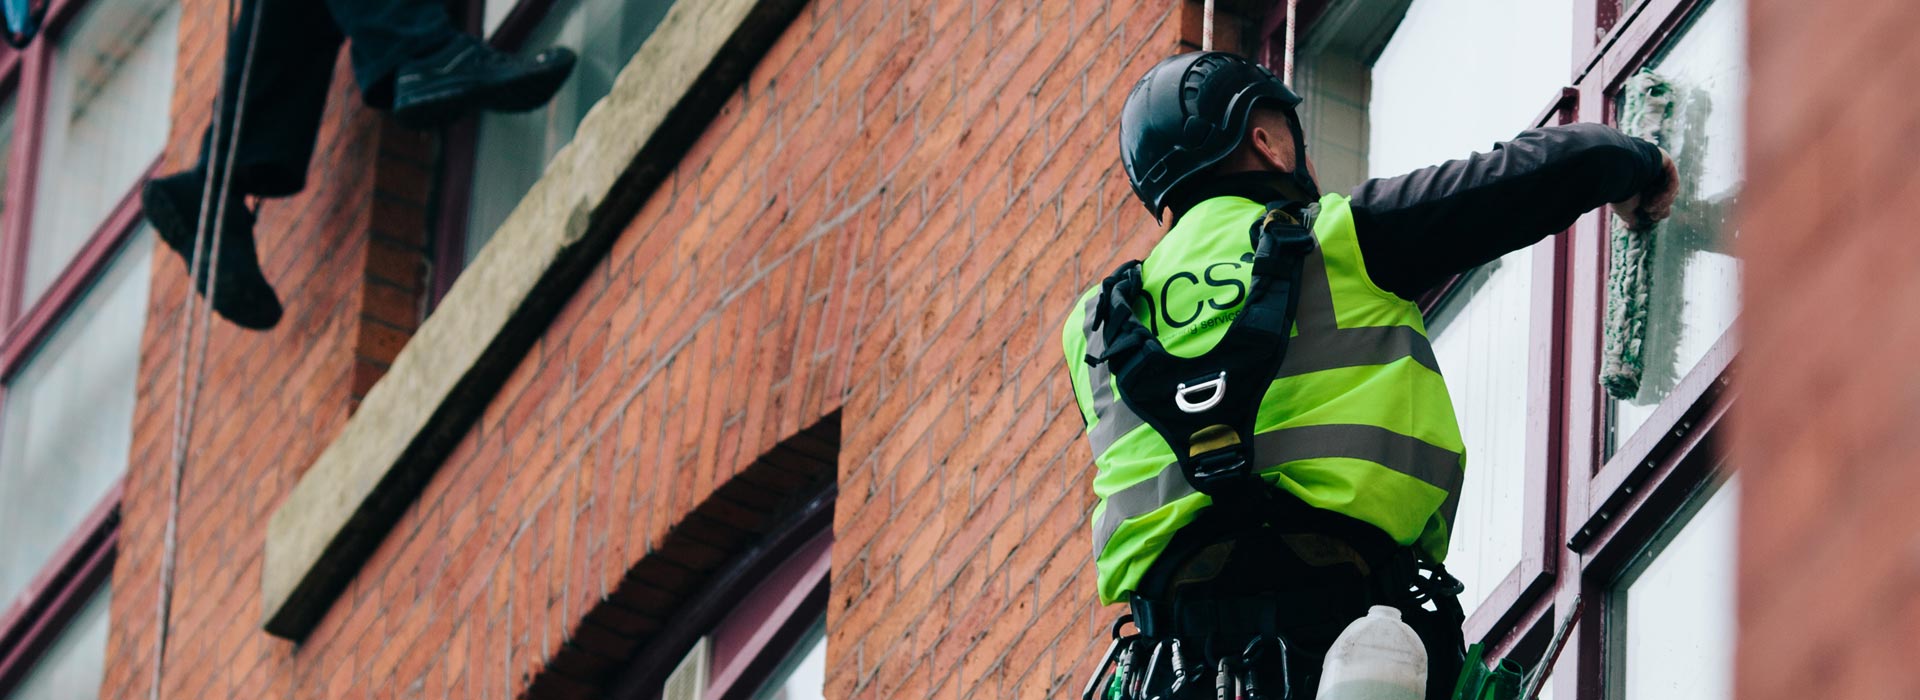 Abseiling and Rope Access Window Cleaning in the North West - HCS Cleaning Services